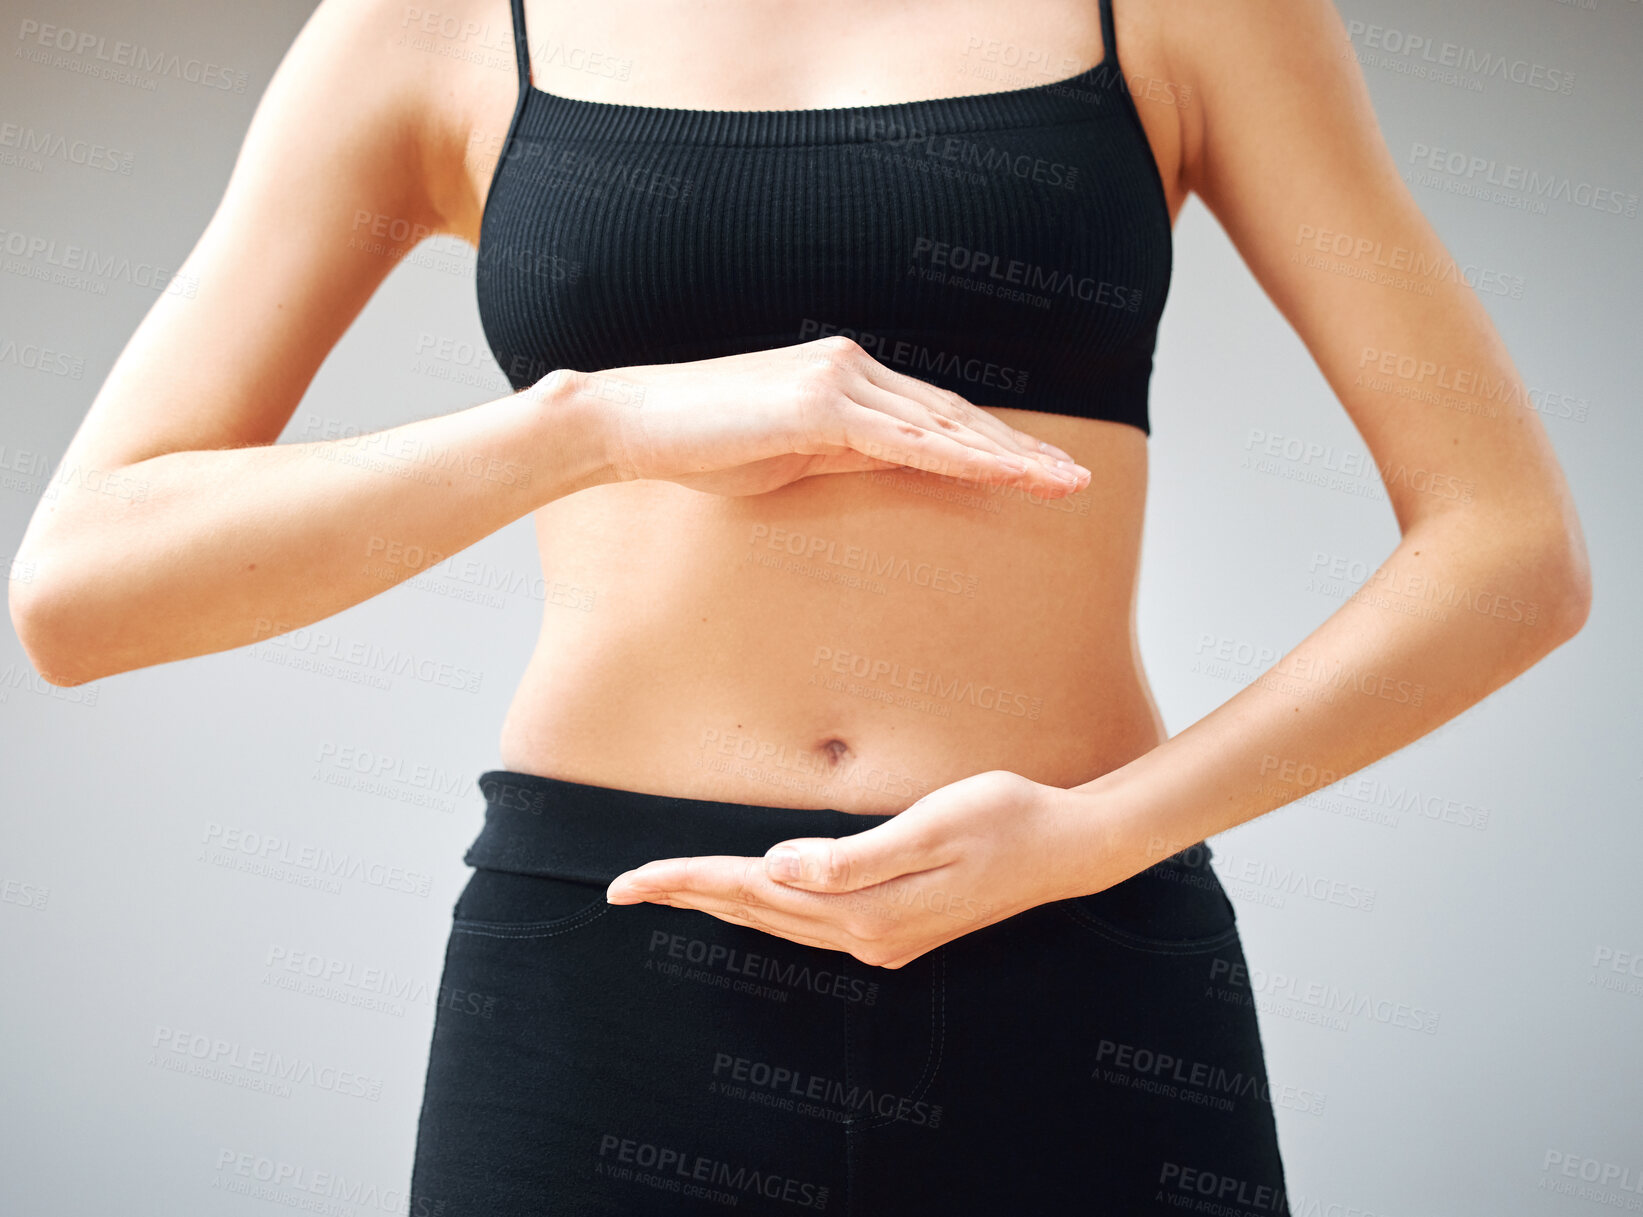 Buy stock photo Shot of a woman forming a circle with her hands in front of her belly